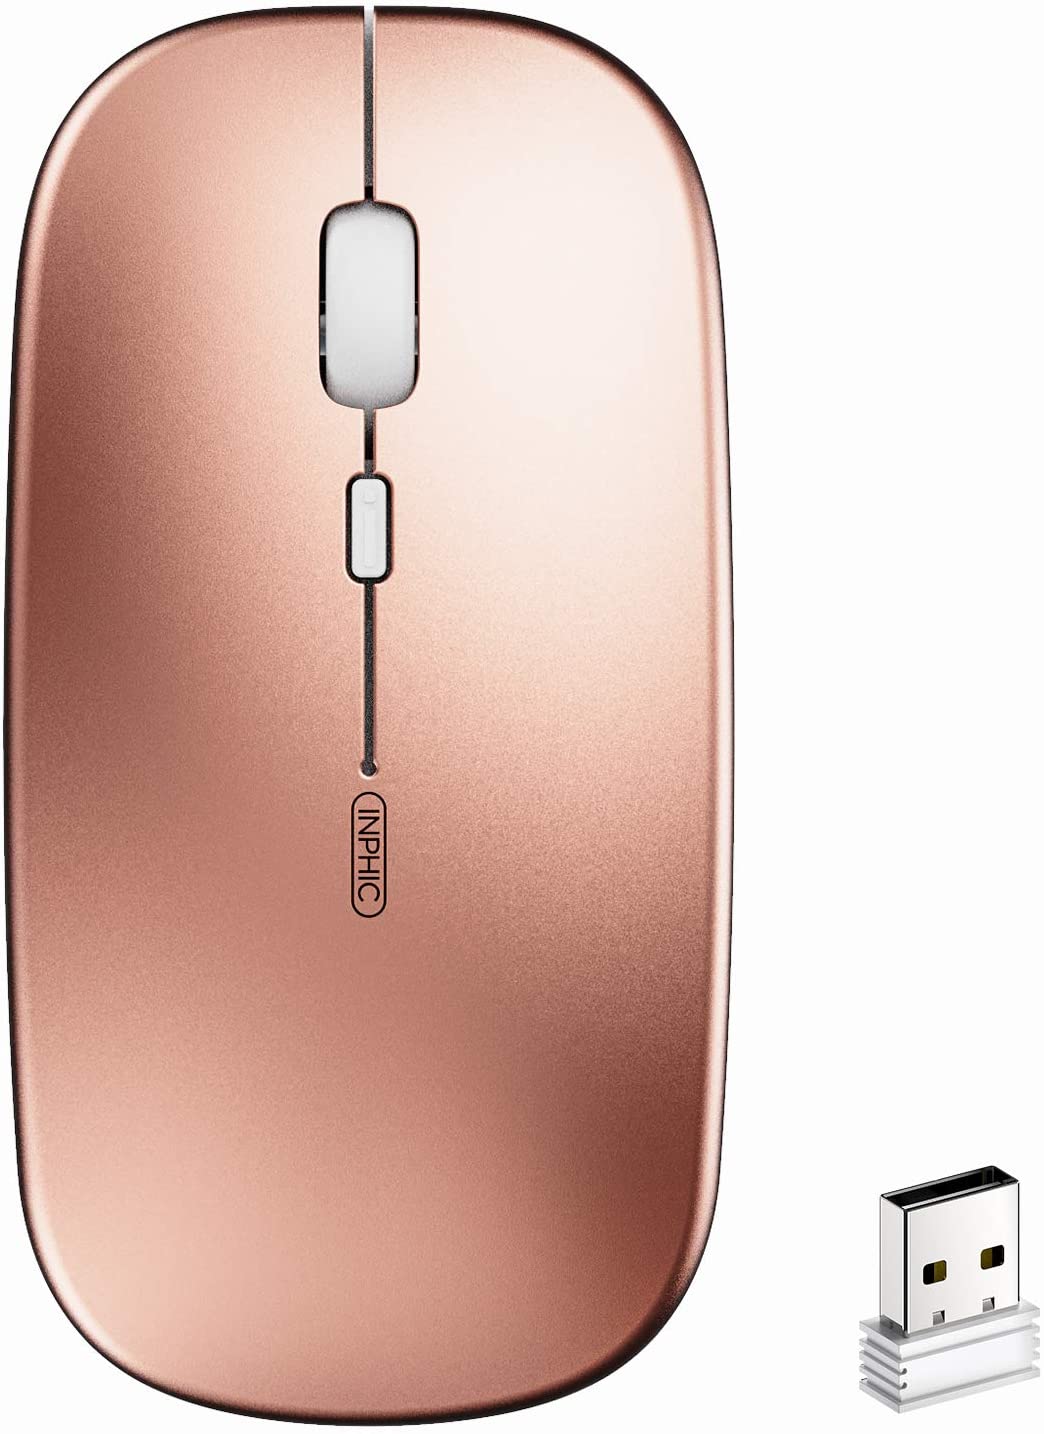 Rechargeable Wireless Mouse, inphic Mute Silent Click Mini Noiseless Optical Mouse